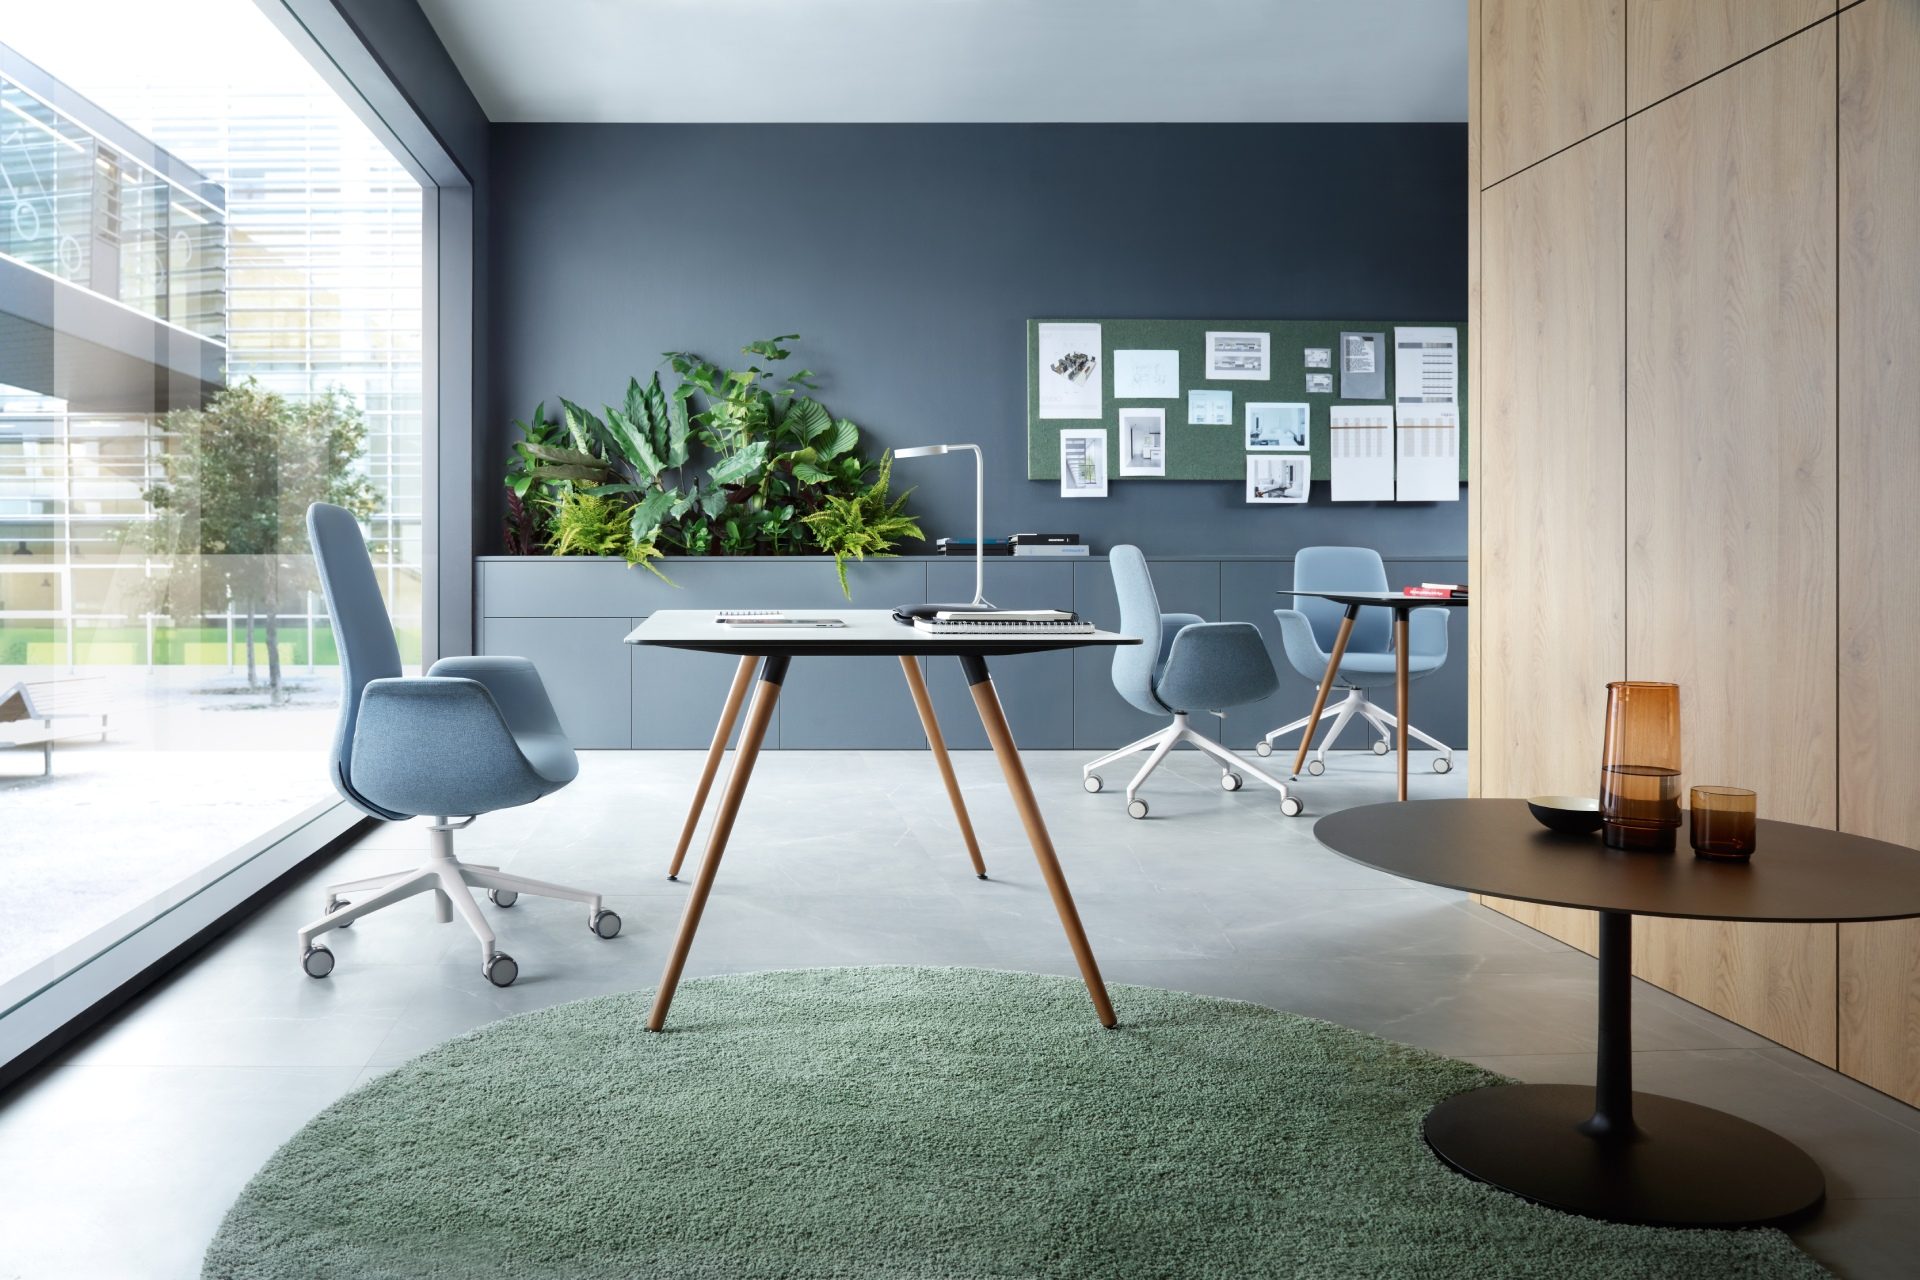 ElliPro designer desk chair by Profim in blue fabric, available in eba